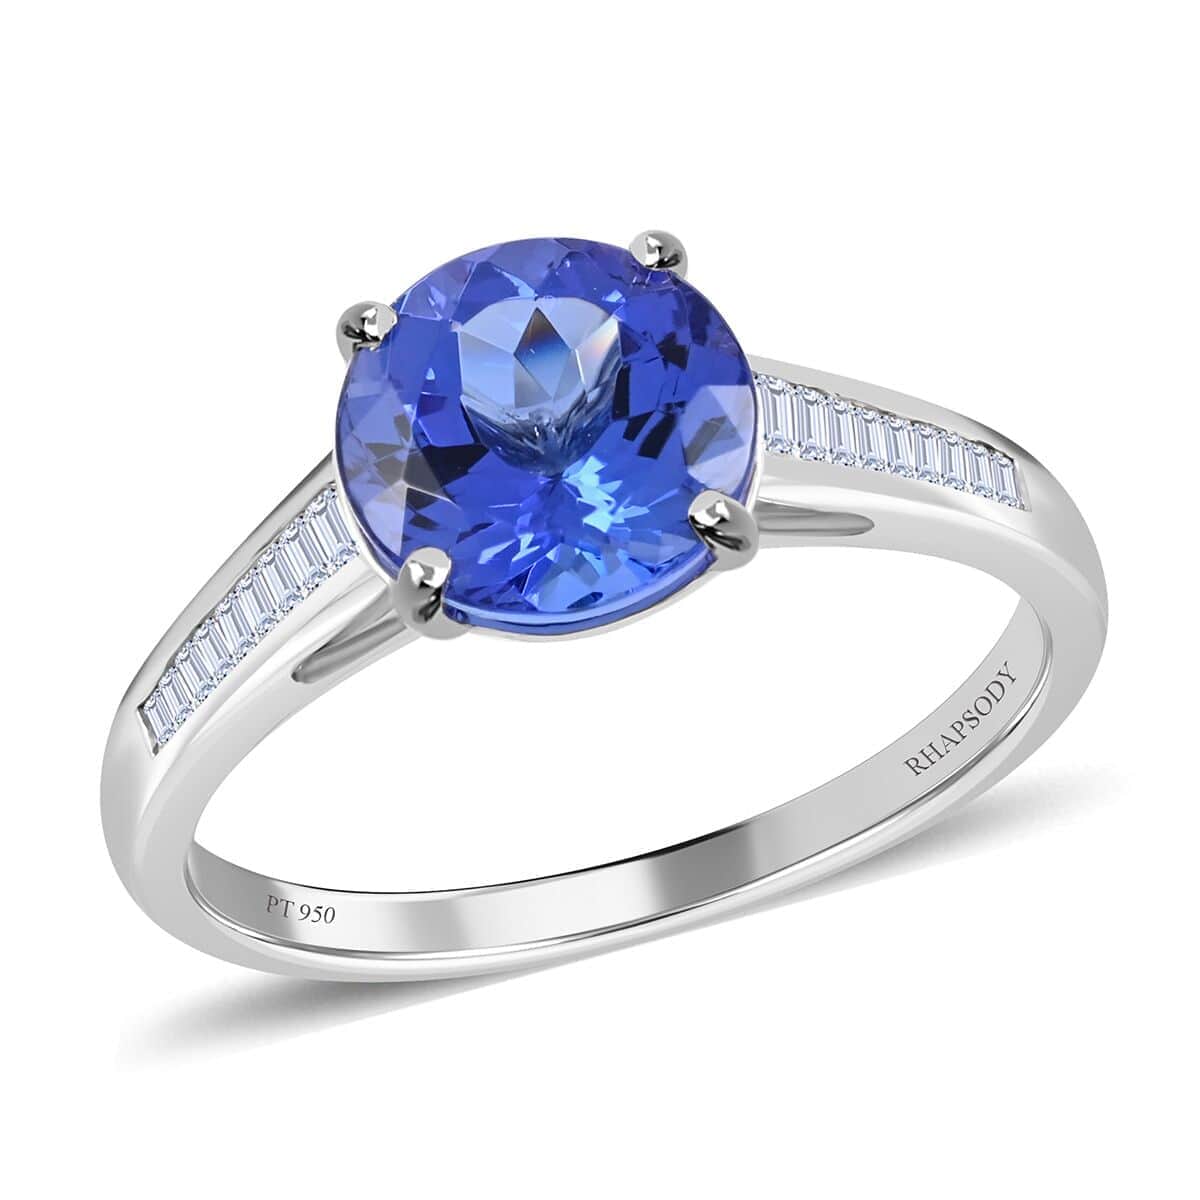 Certified Rhapsody 950 Platinum AAAA Tanzanite and E-F VS Diamond Ring 5.25 Grams 3.25 ctw (Del. in 10-15 Days) image number 0